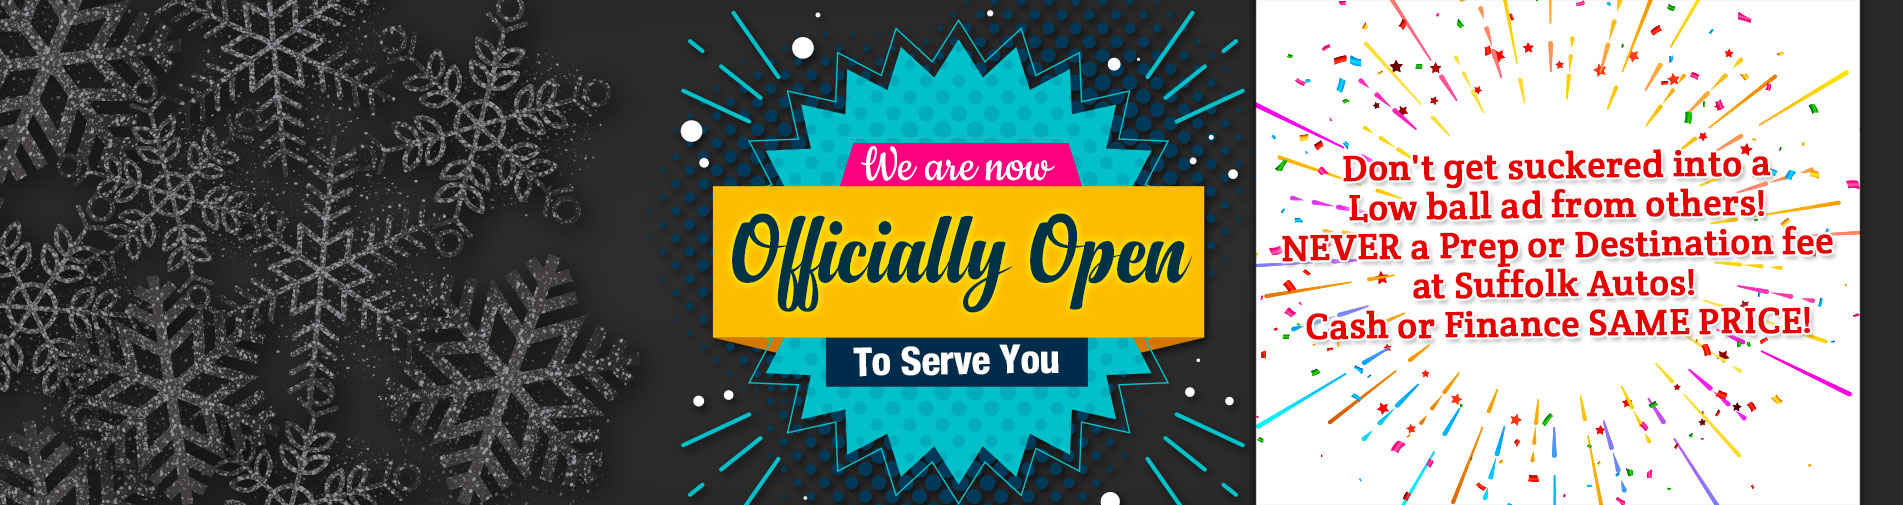  We are now officially Open